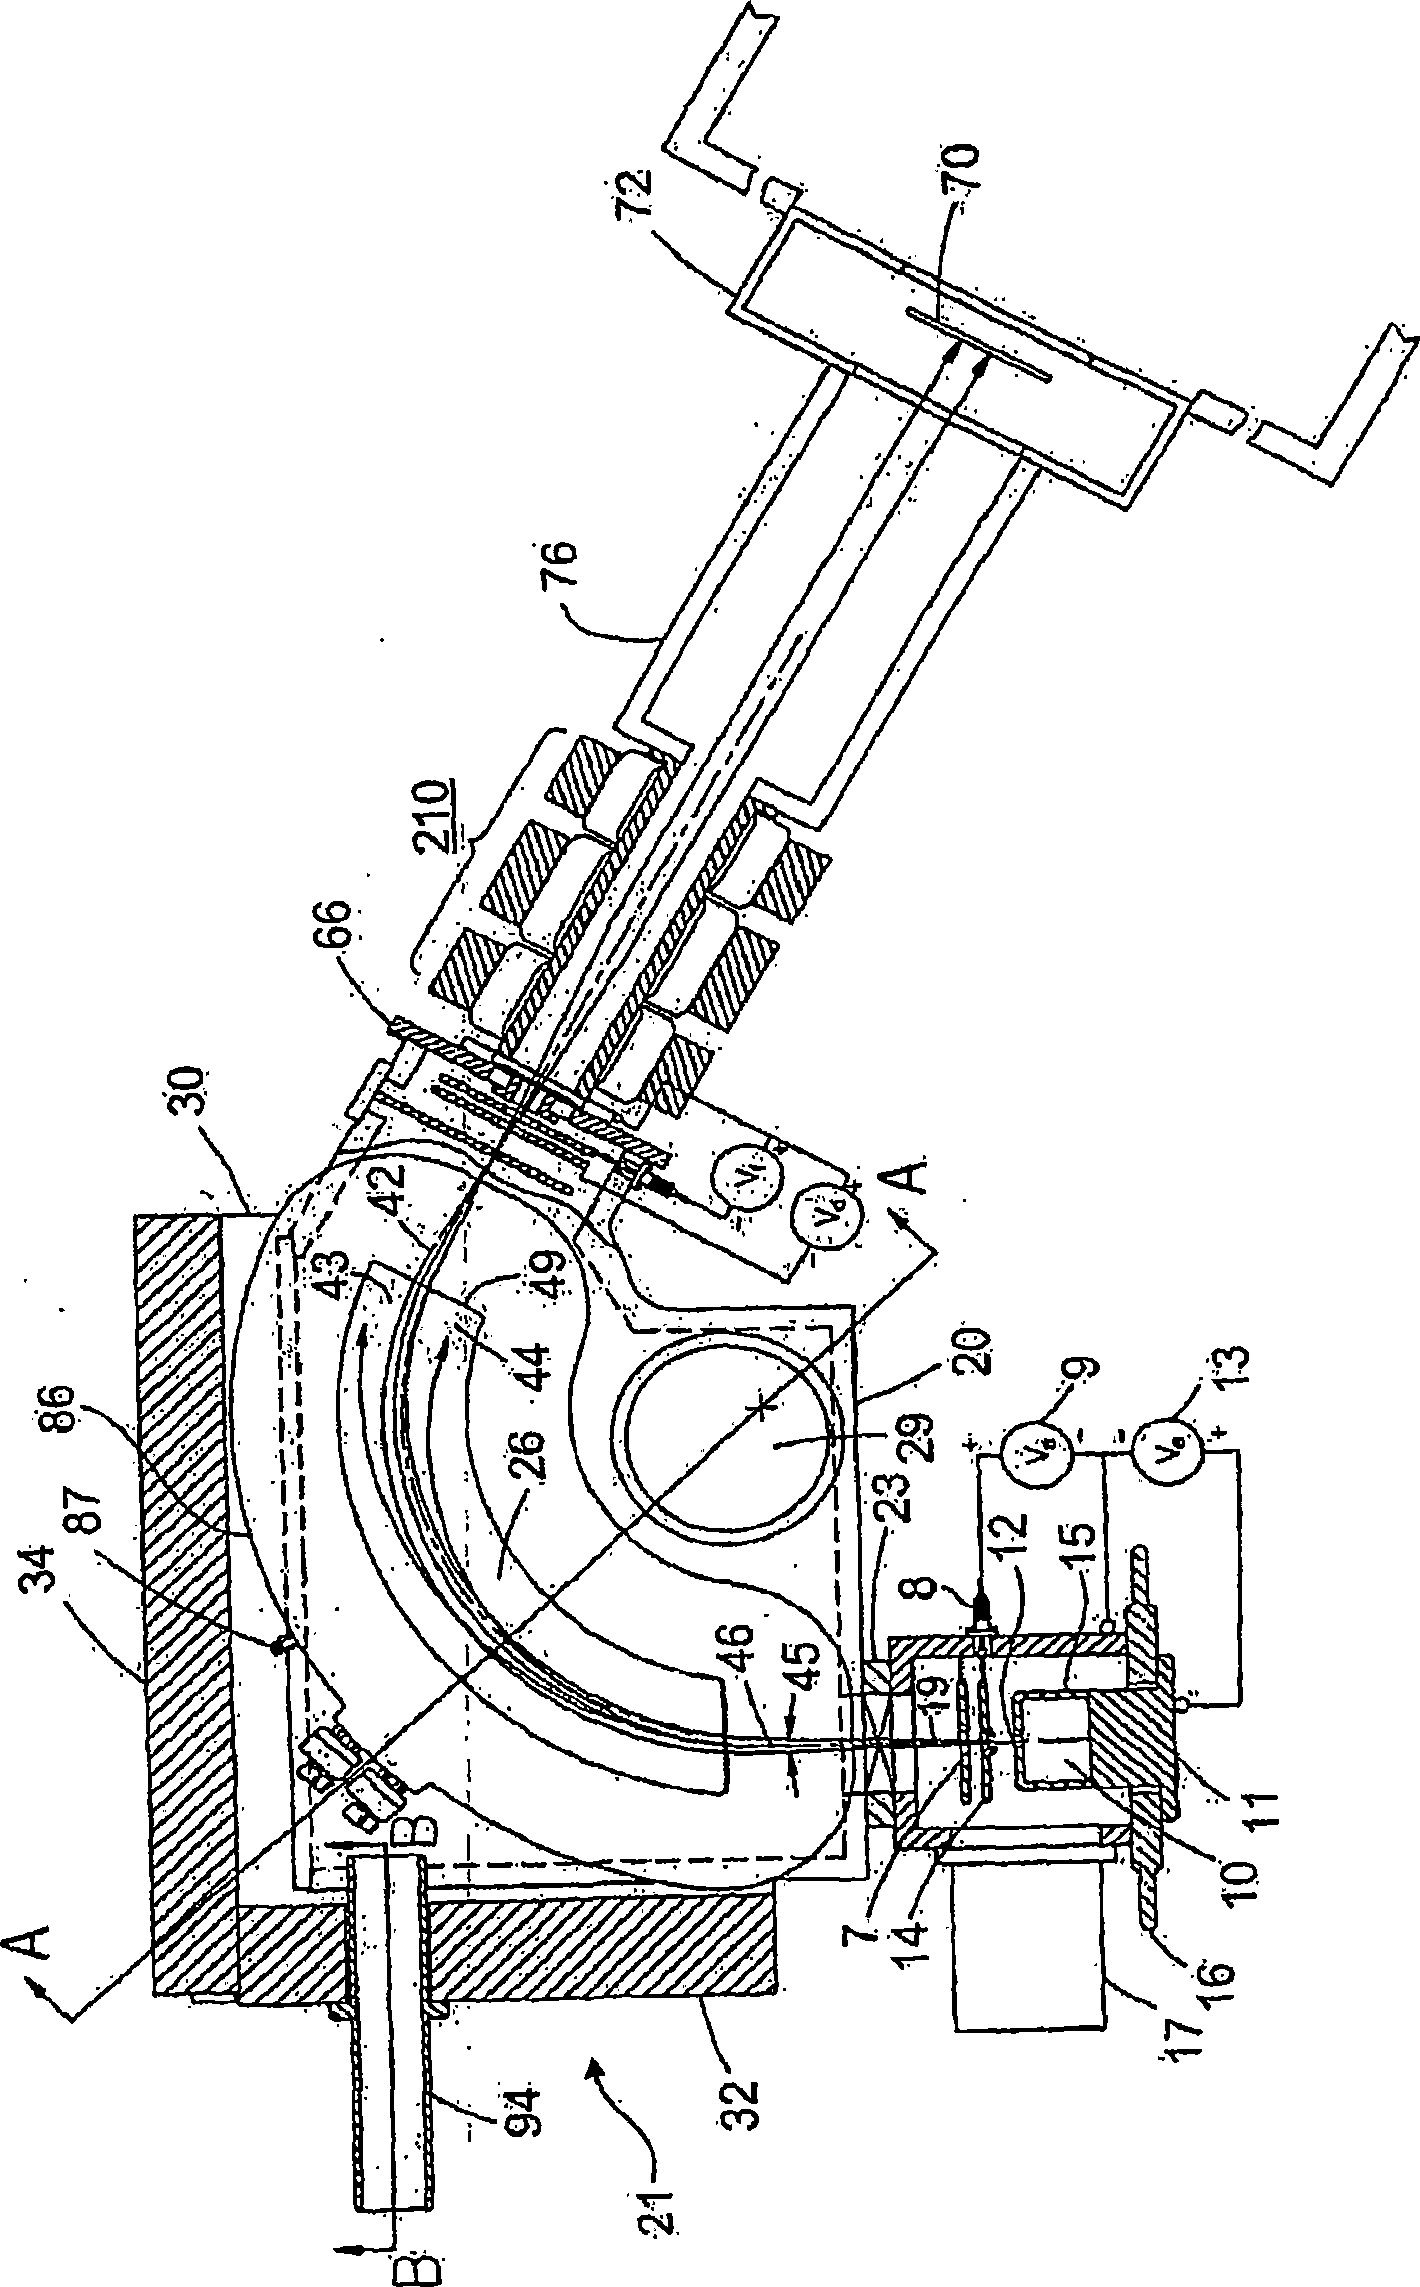 Ion beam apparatus and method for ion implantation